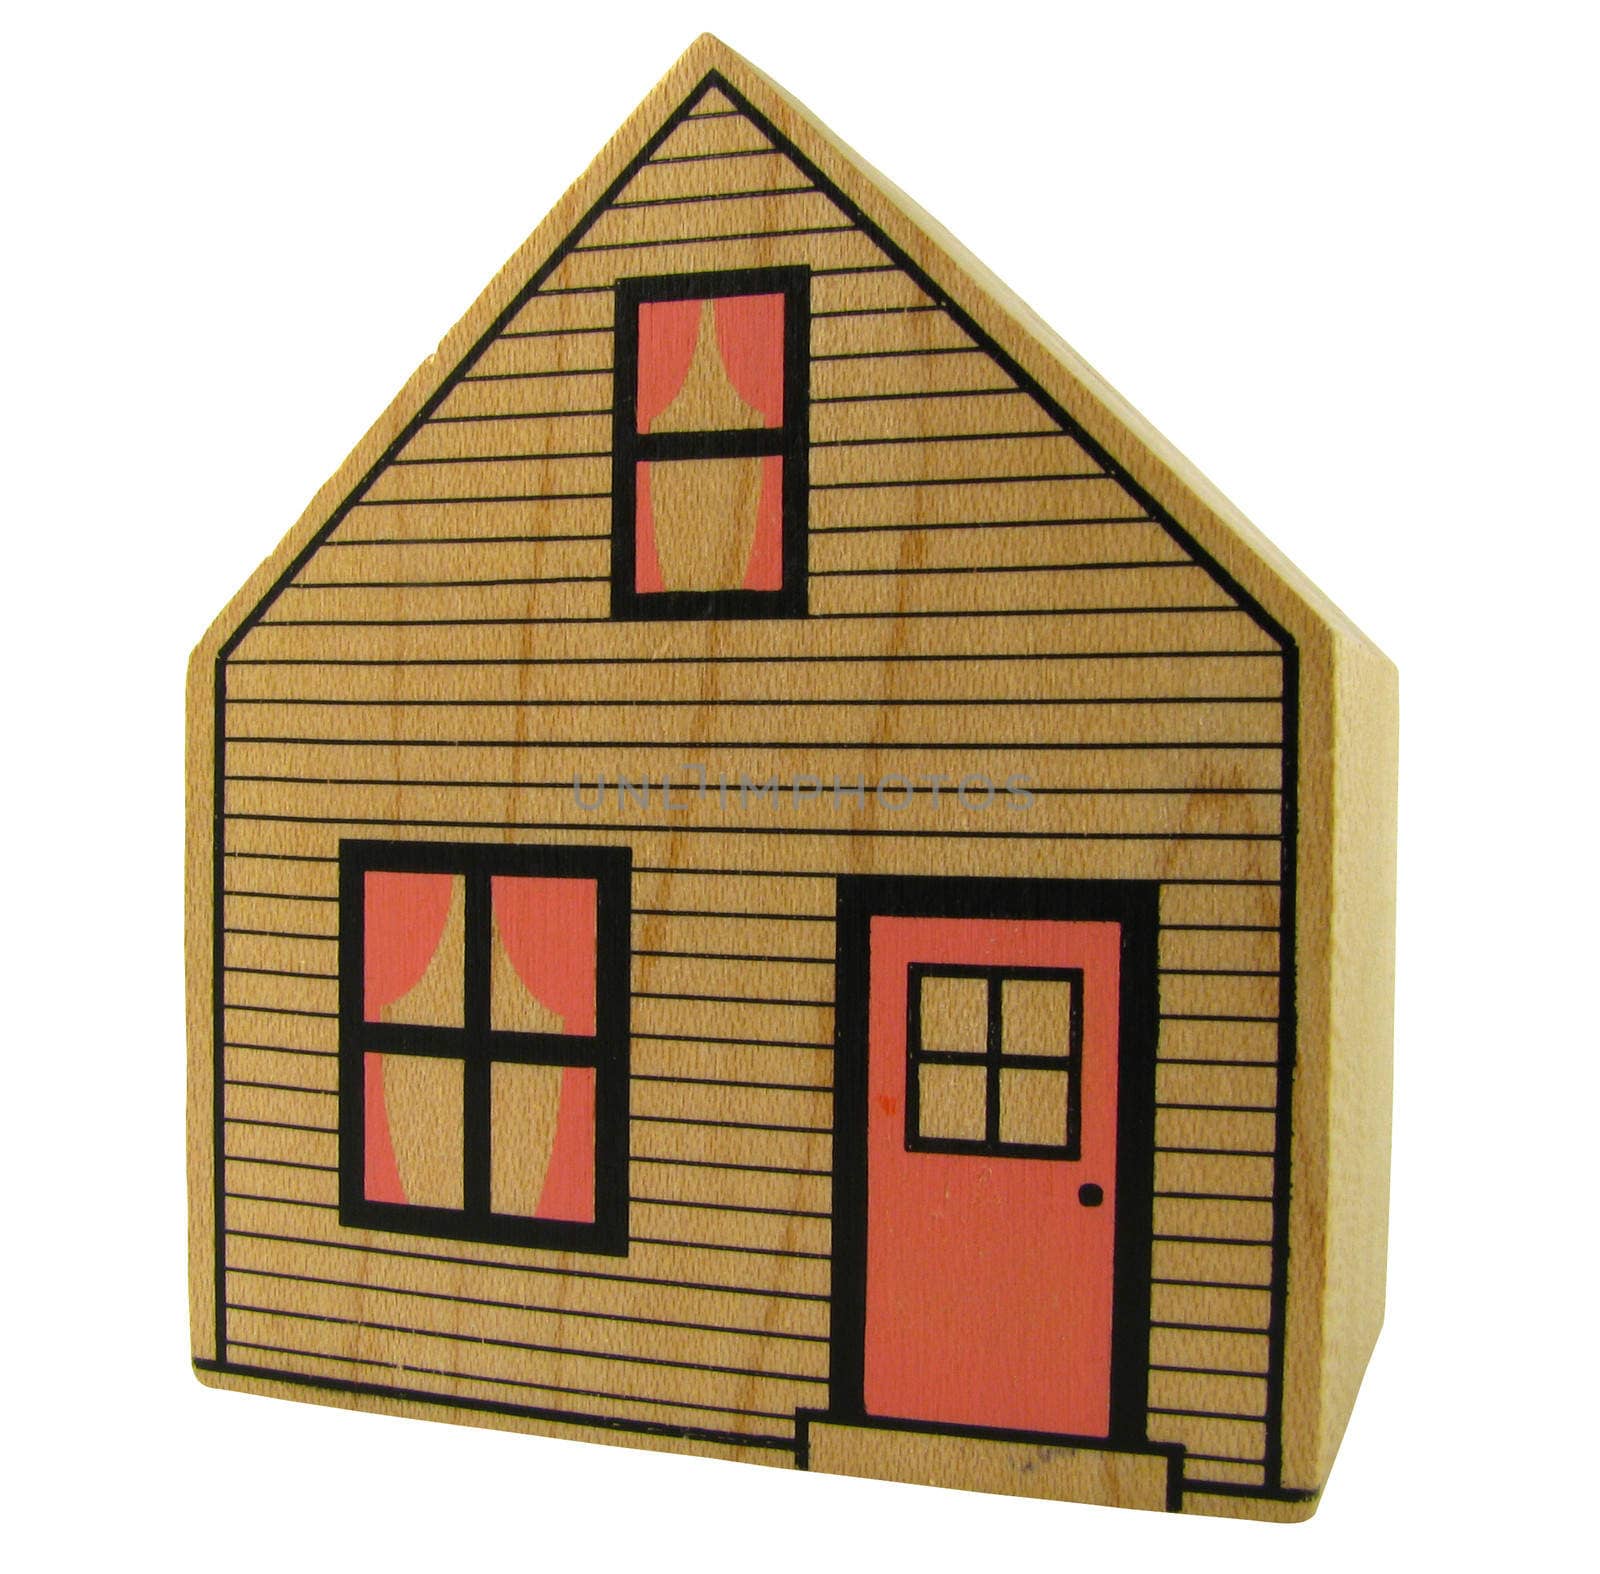 Isolation Of A Toy Wooden House With Clipping Path